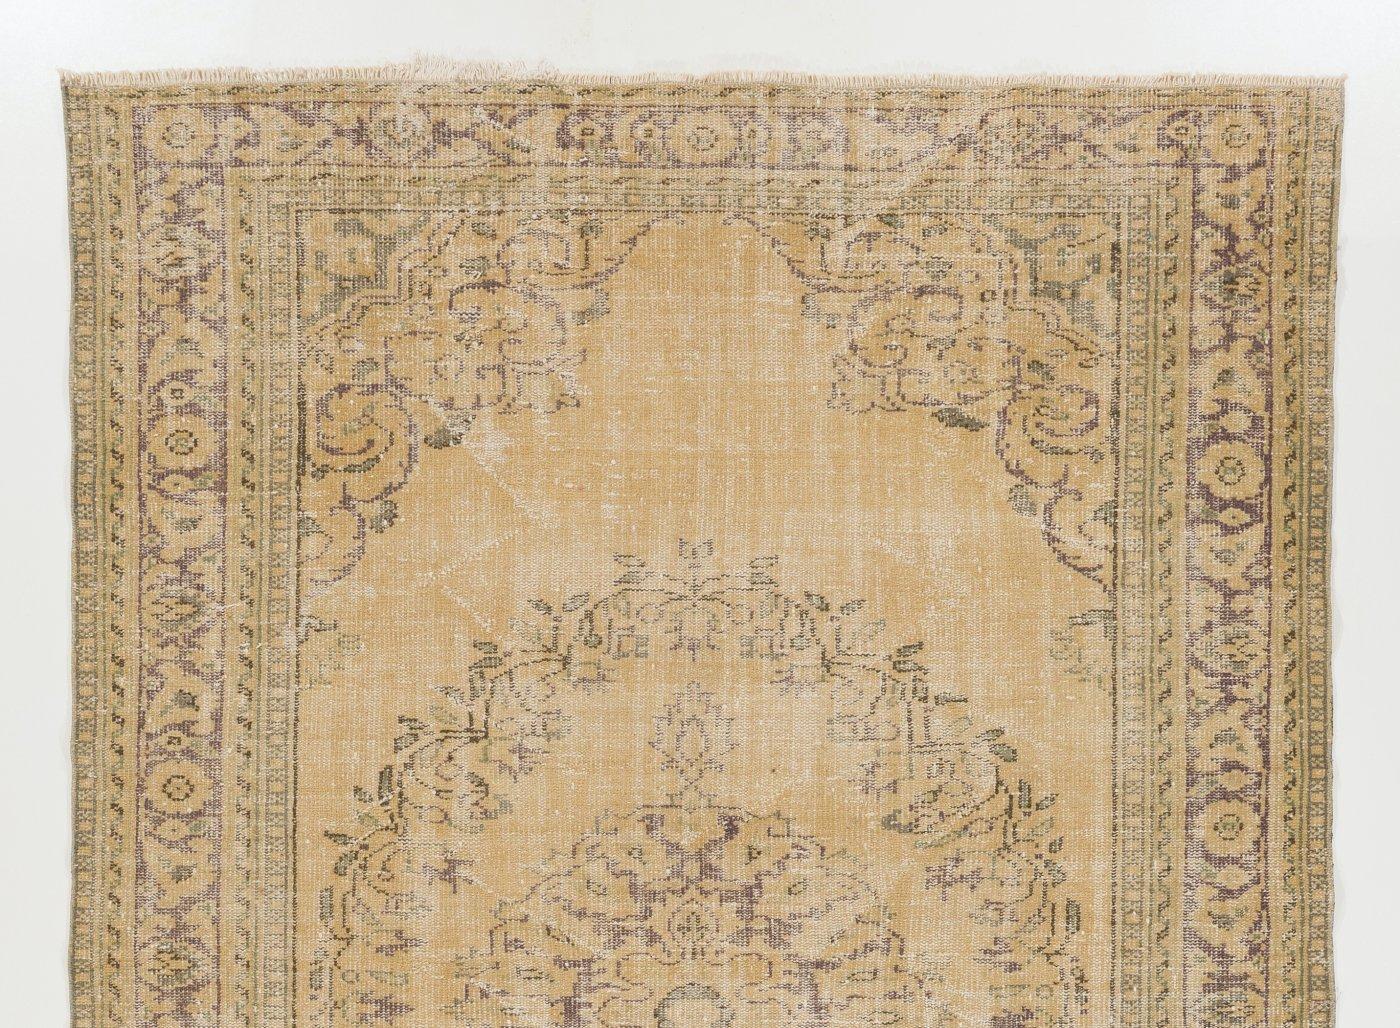 Vintage hand-knotted Turkish area rug from the 1960s with distressed wool pile on cotton foundation. It has a central medallion and a floral wreath around it as well as curvilinear corner pieces and a floral border, all in purplish brown against a